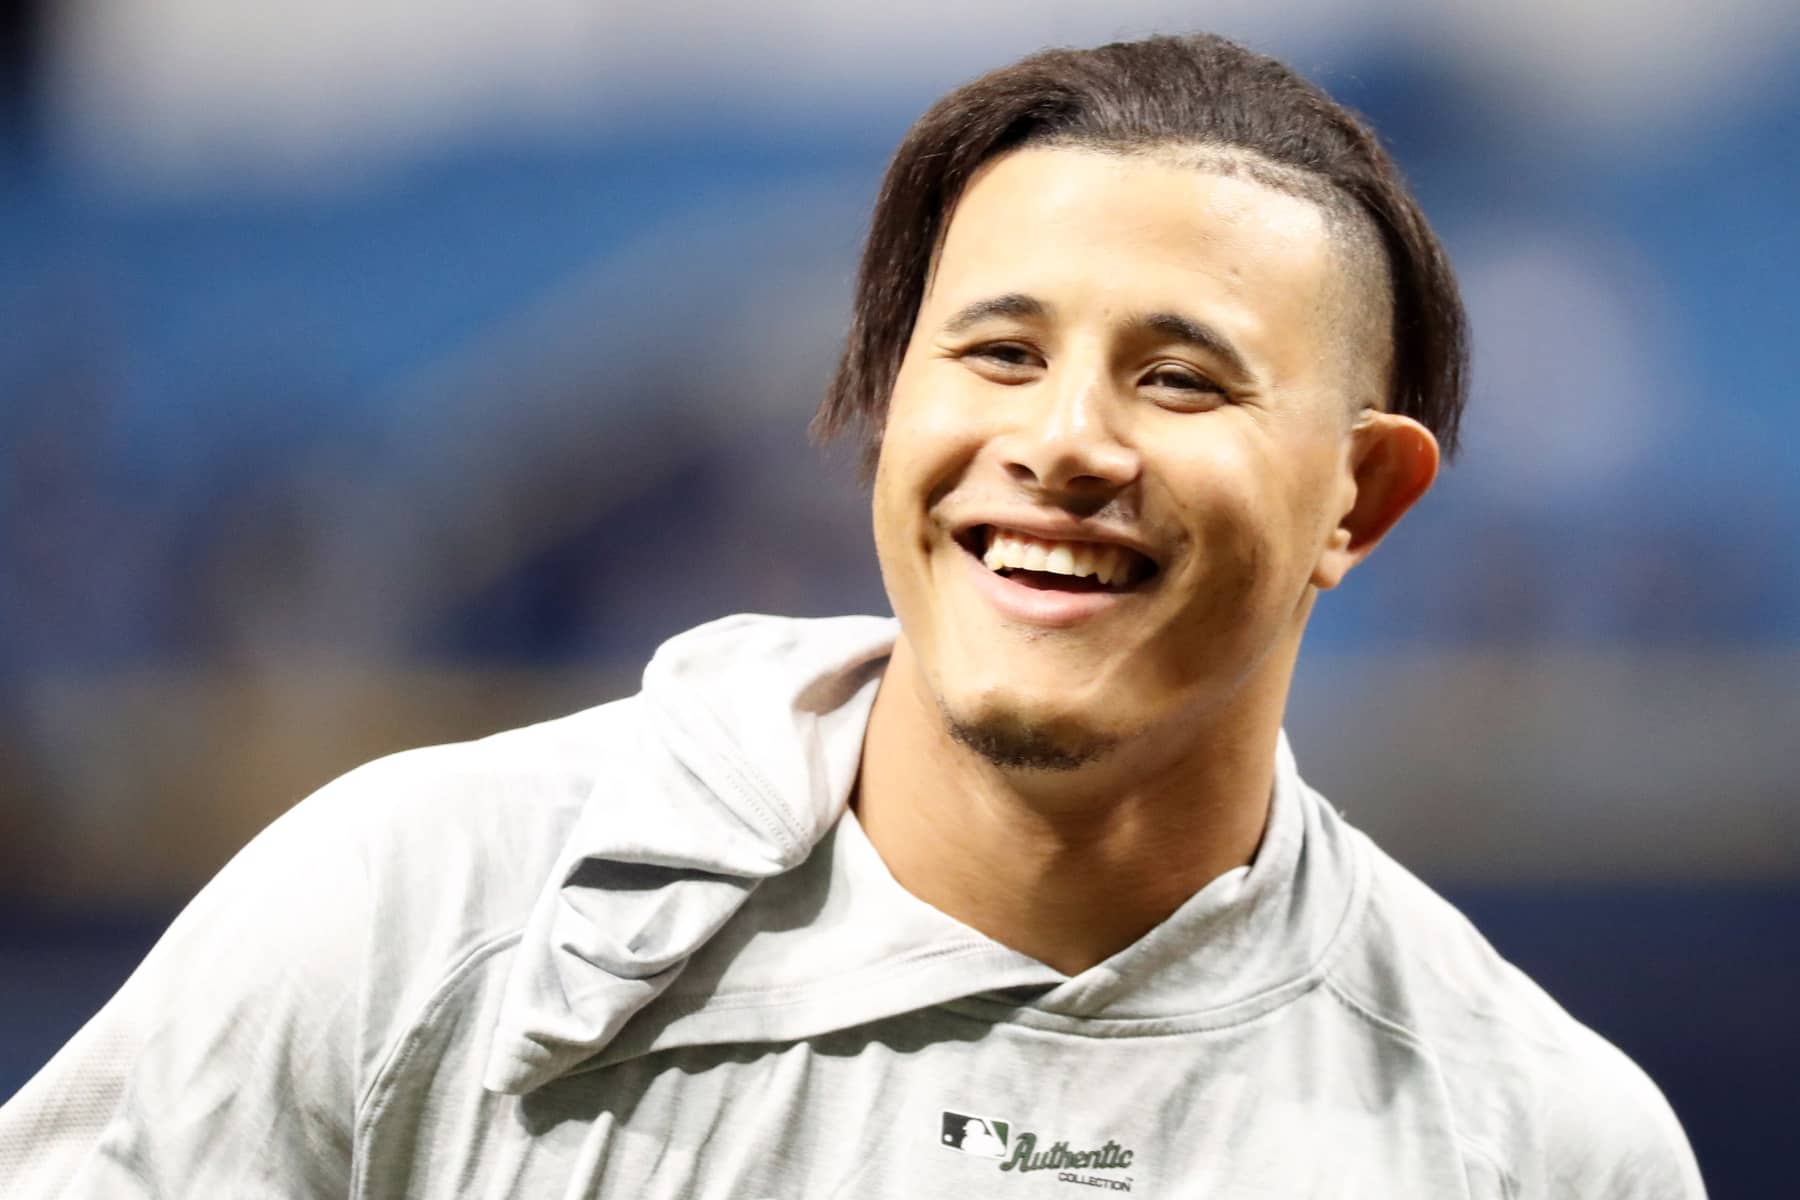 WATCH: Manny Machado surprises young fan with special gift